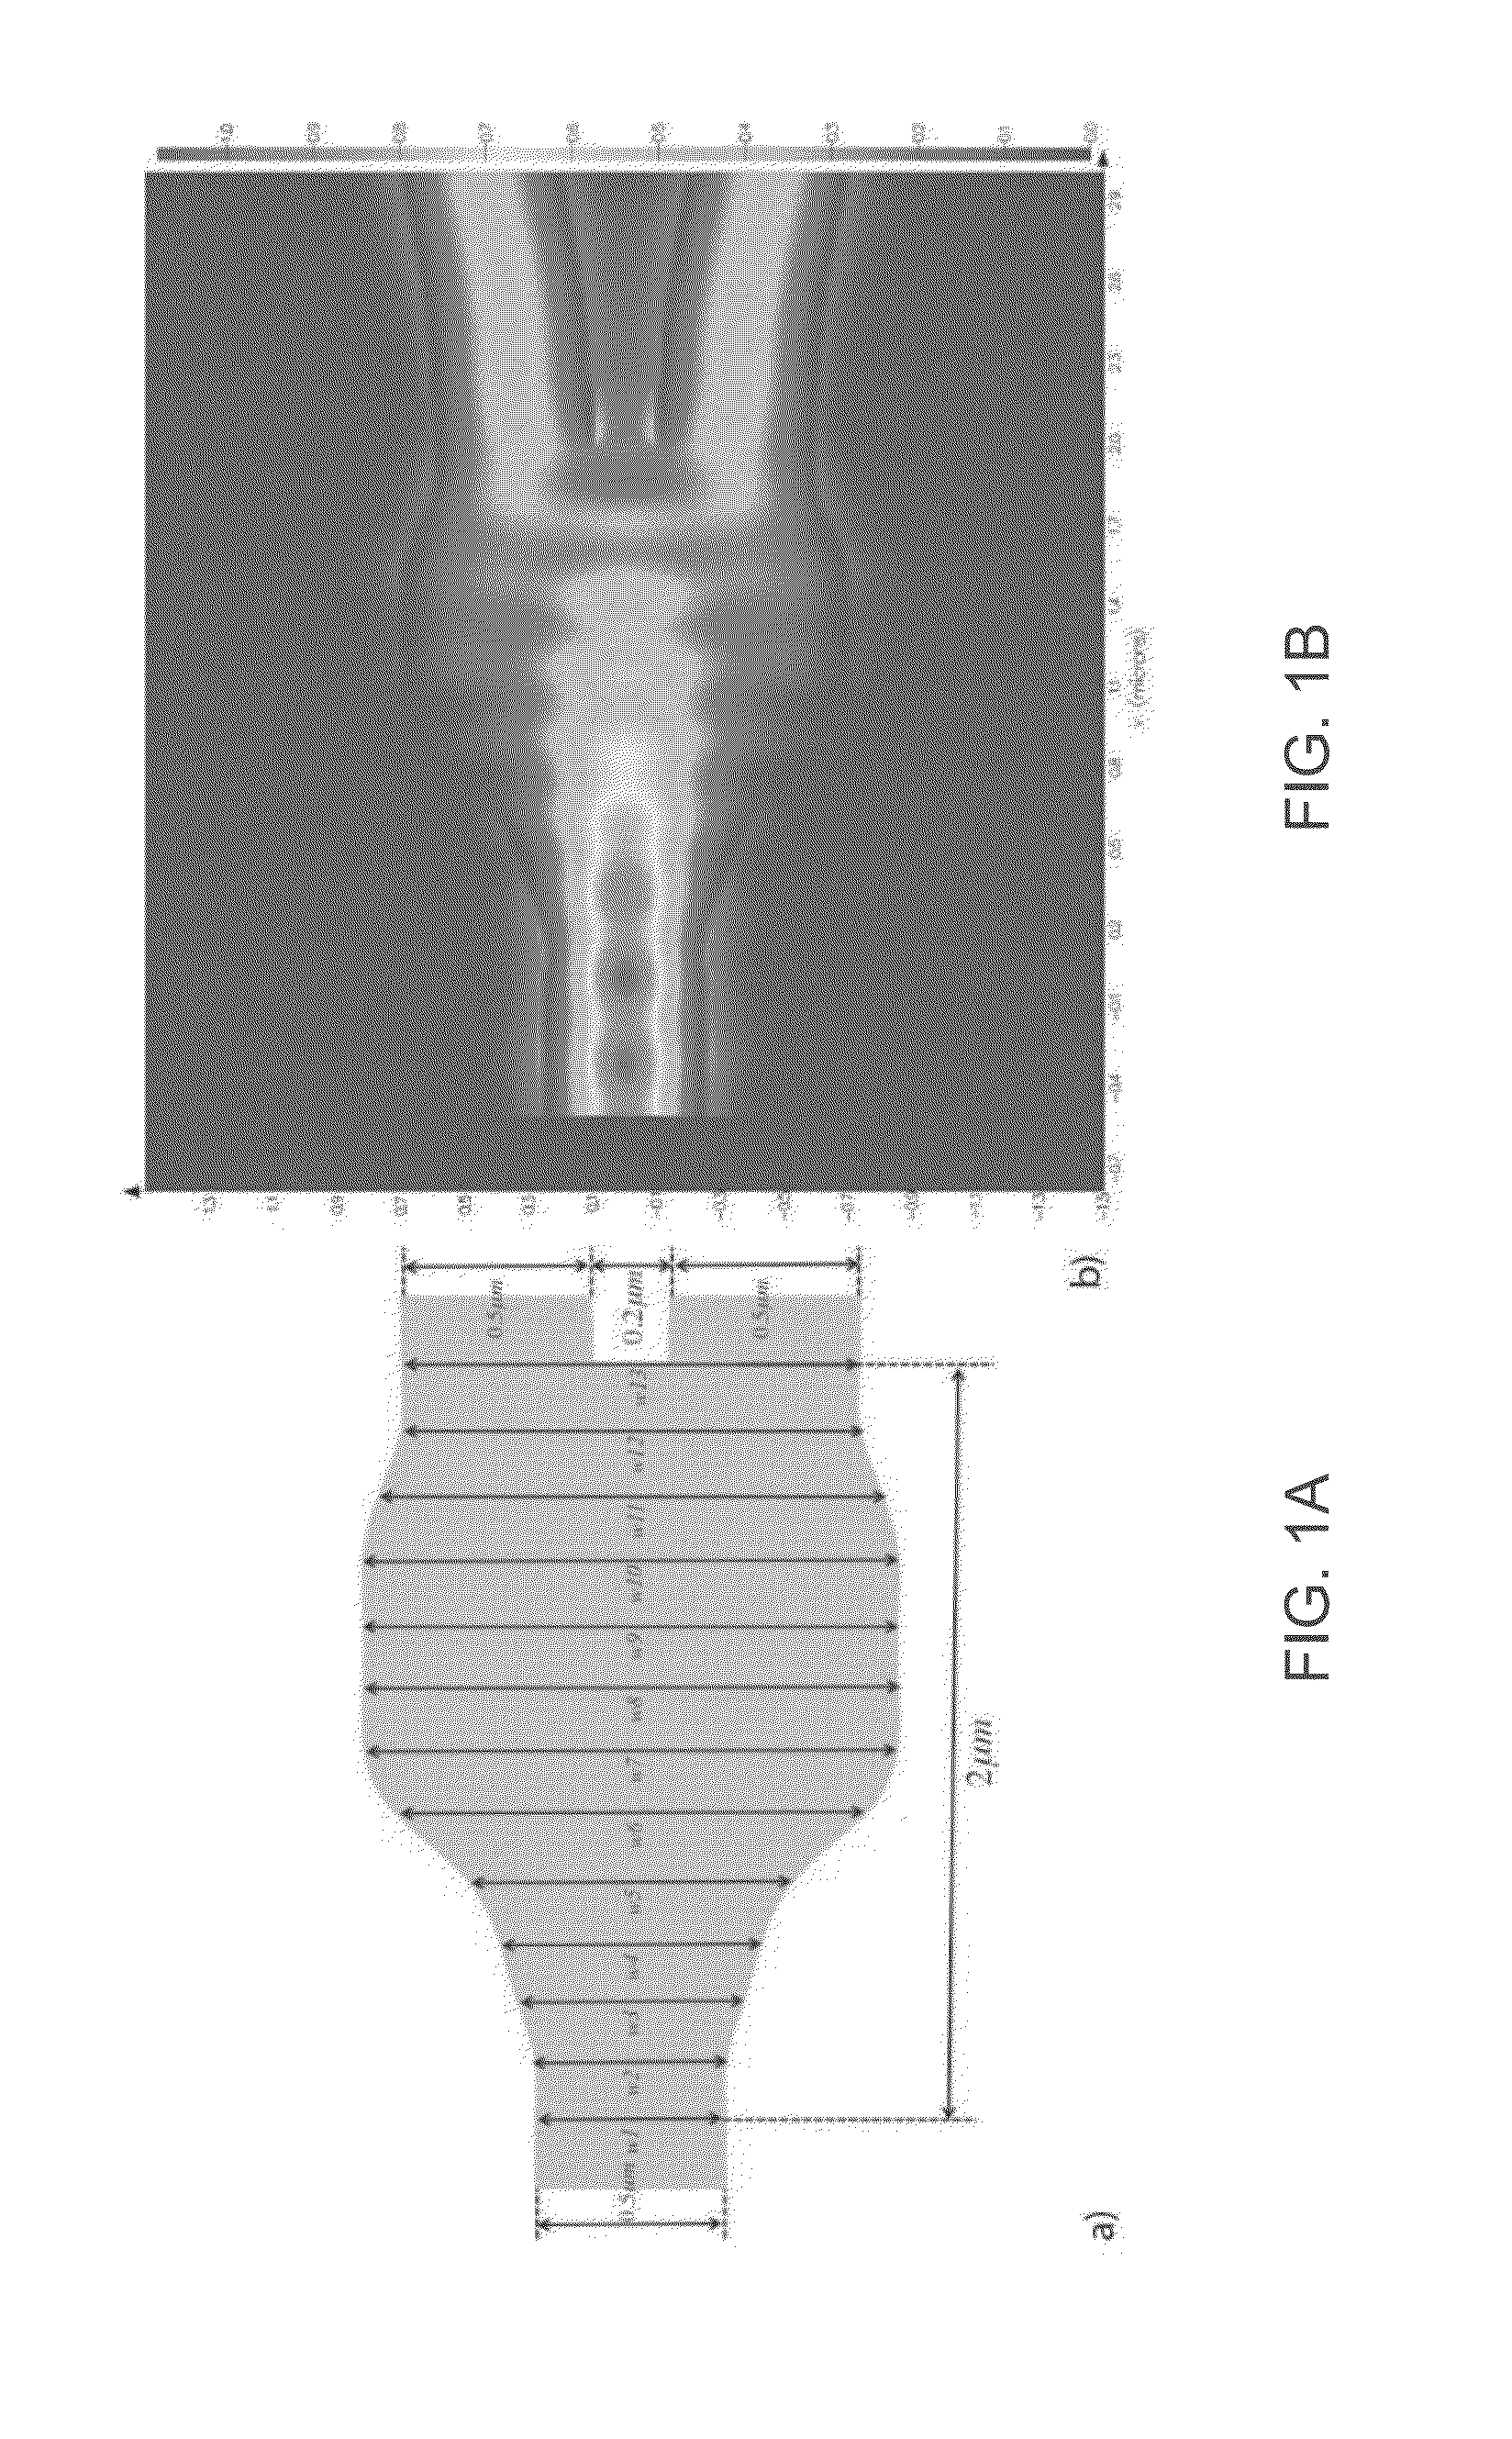 Methods for designing photonic devices